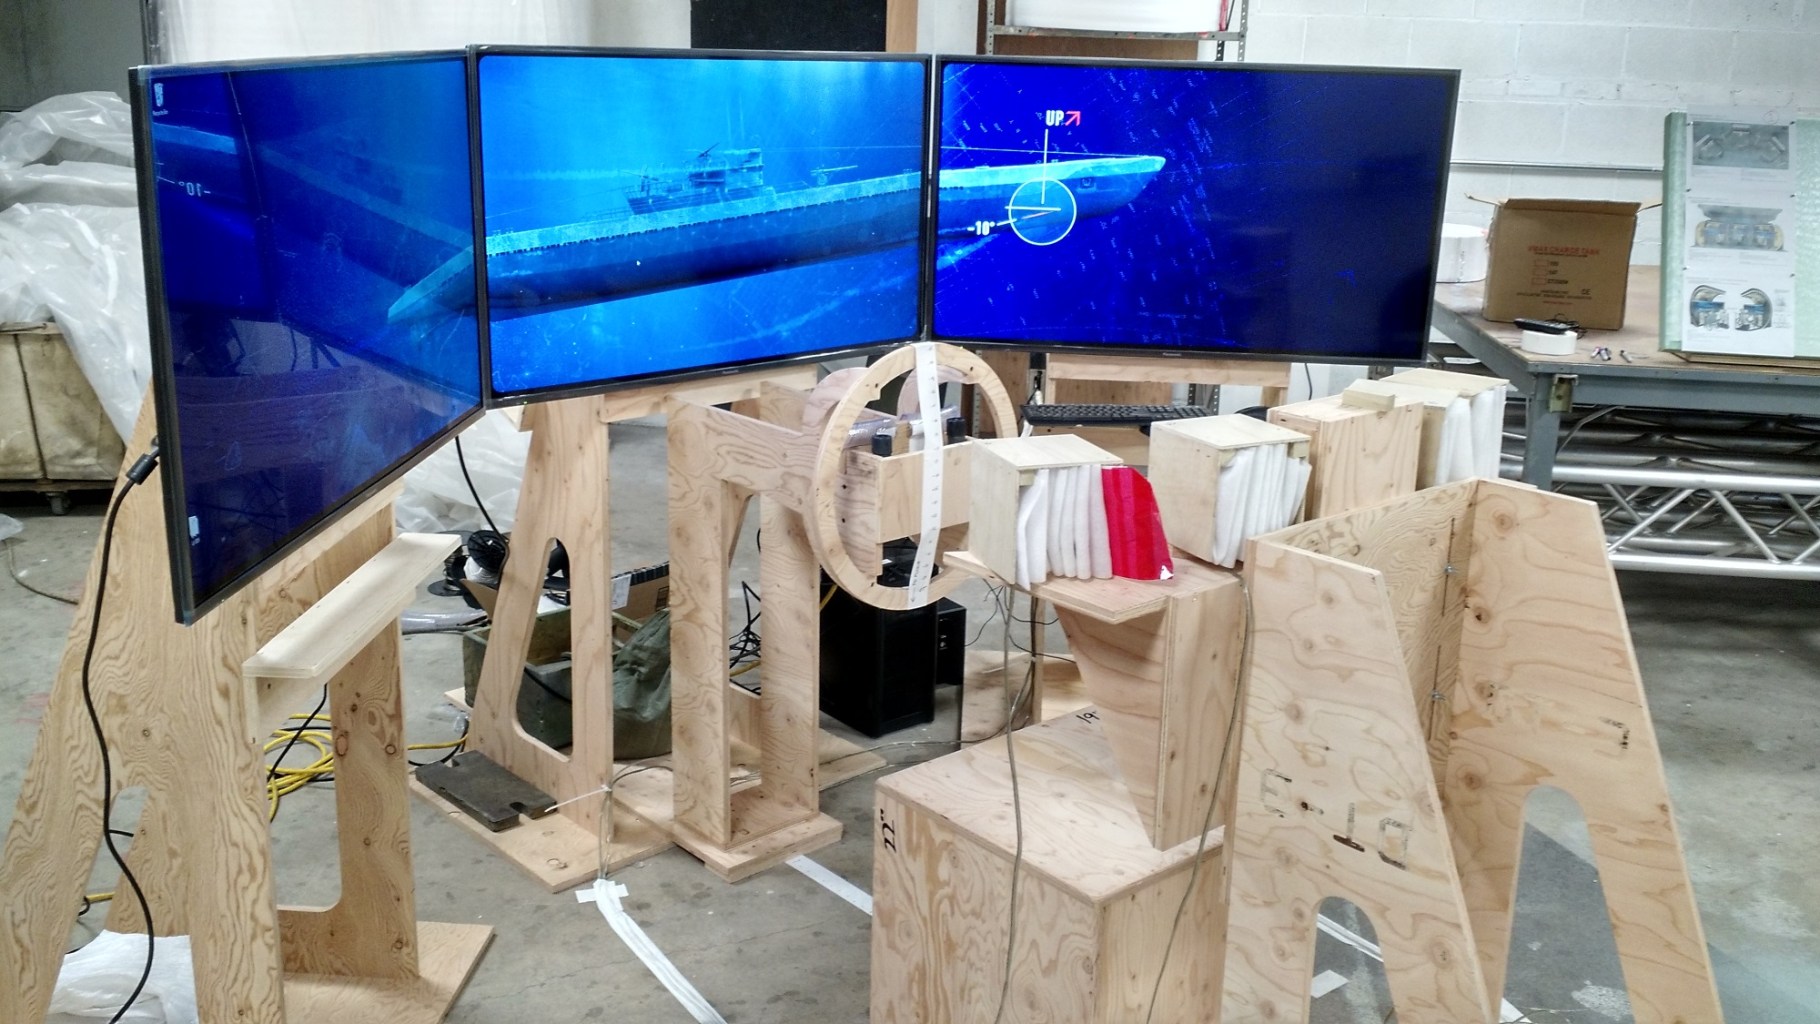 An image of three LCD screens in a semi circle standing on saw horses in a workshop with the image of a submarine displayed on the screens. 